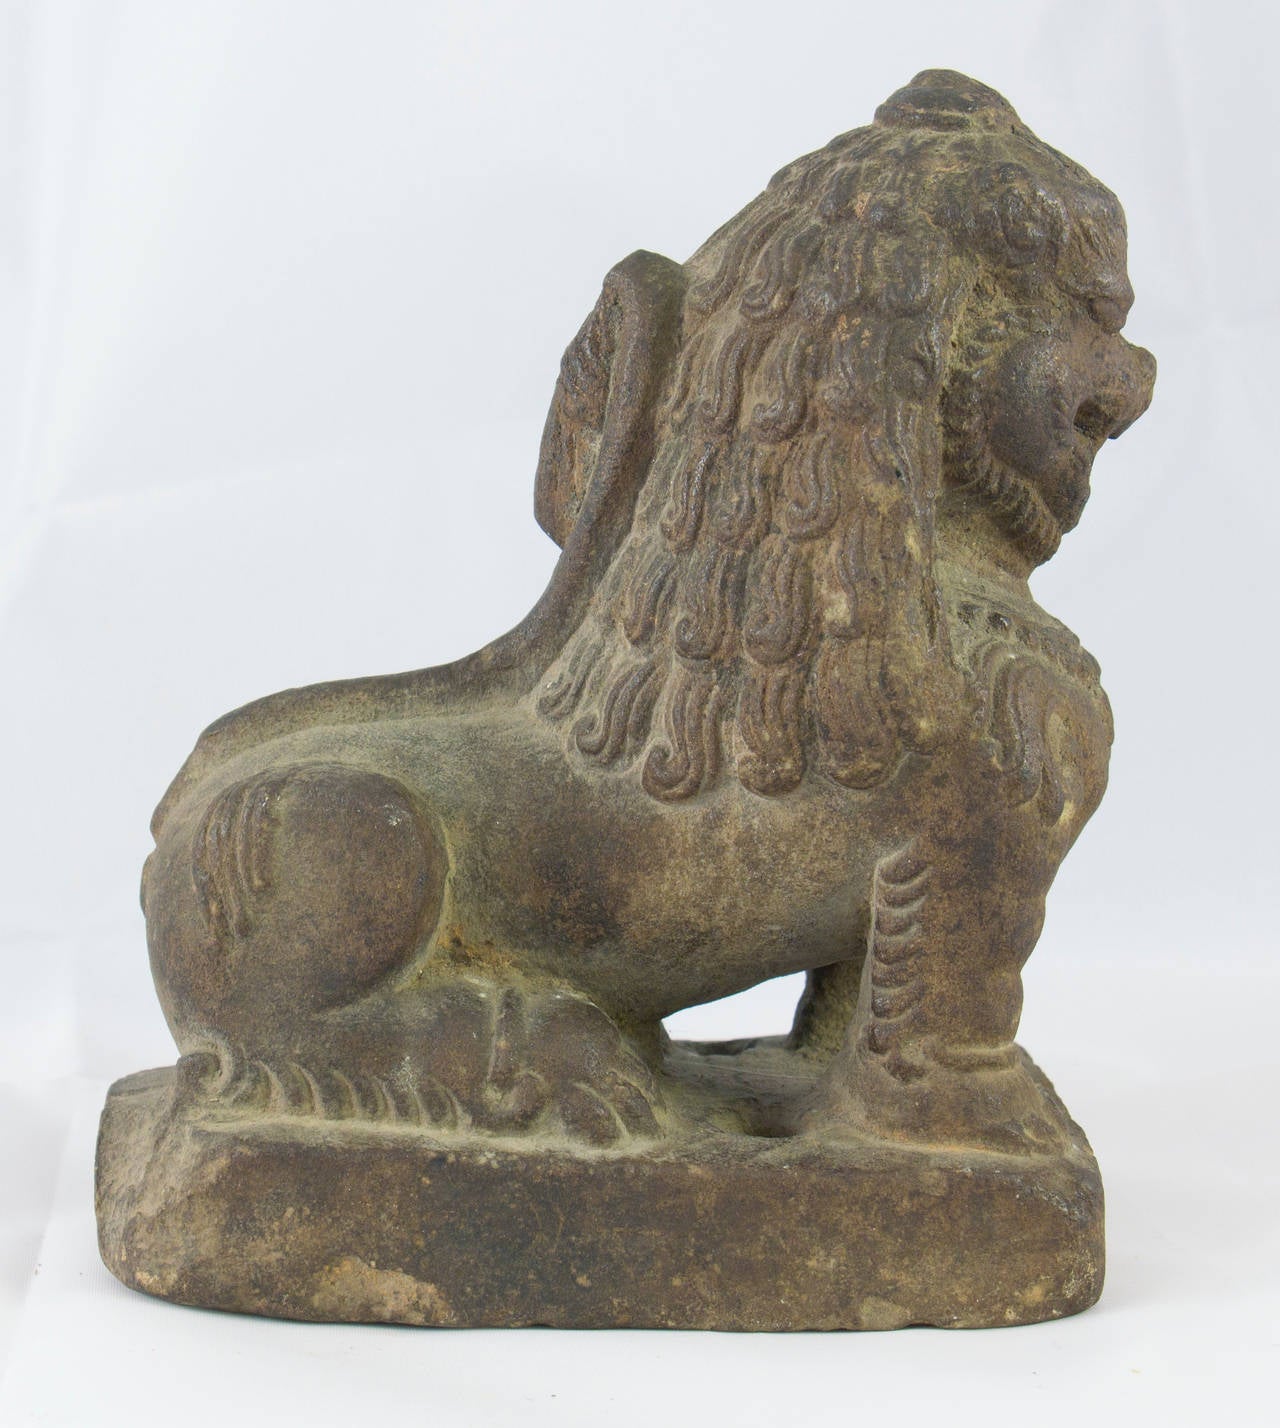 11th century Nepalese lion made of sandstone.